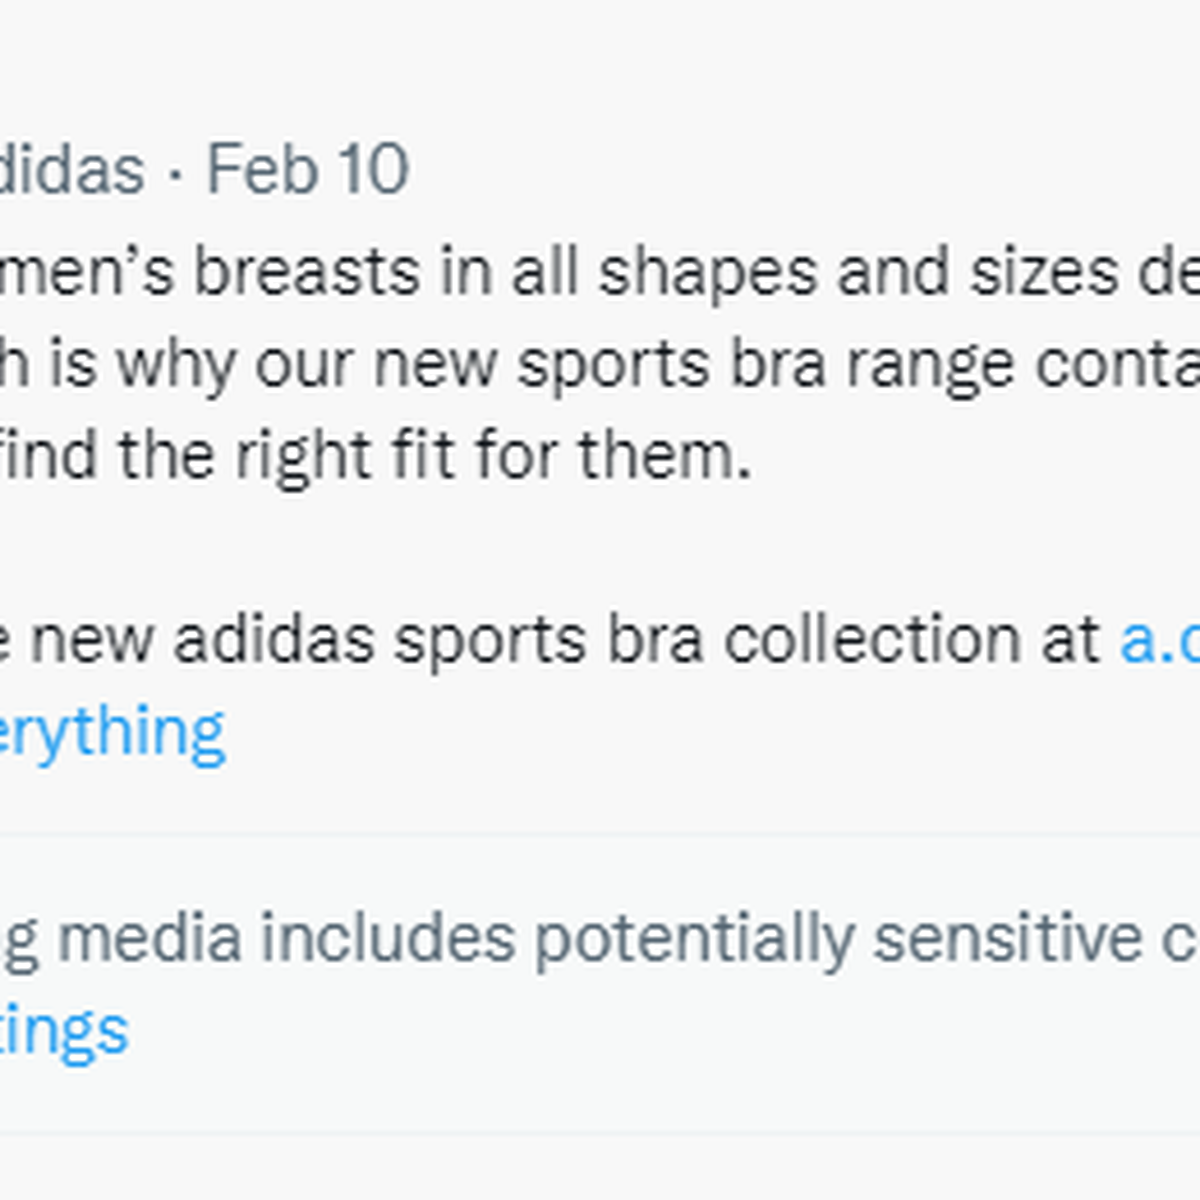 Adidas Shares Image of 25 Women's Bare Breasts to Promote New Sports Bra